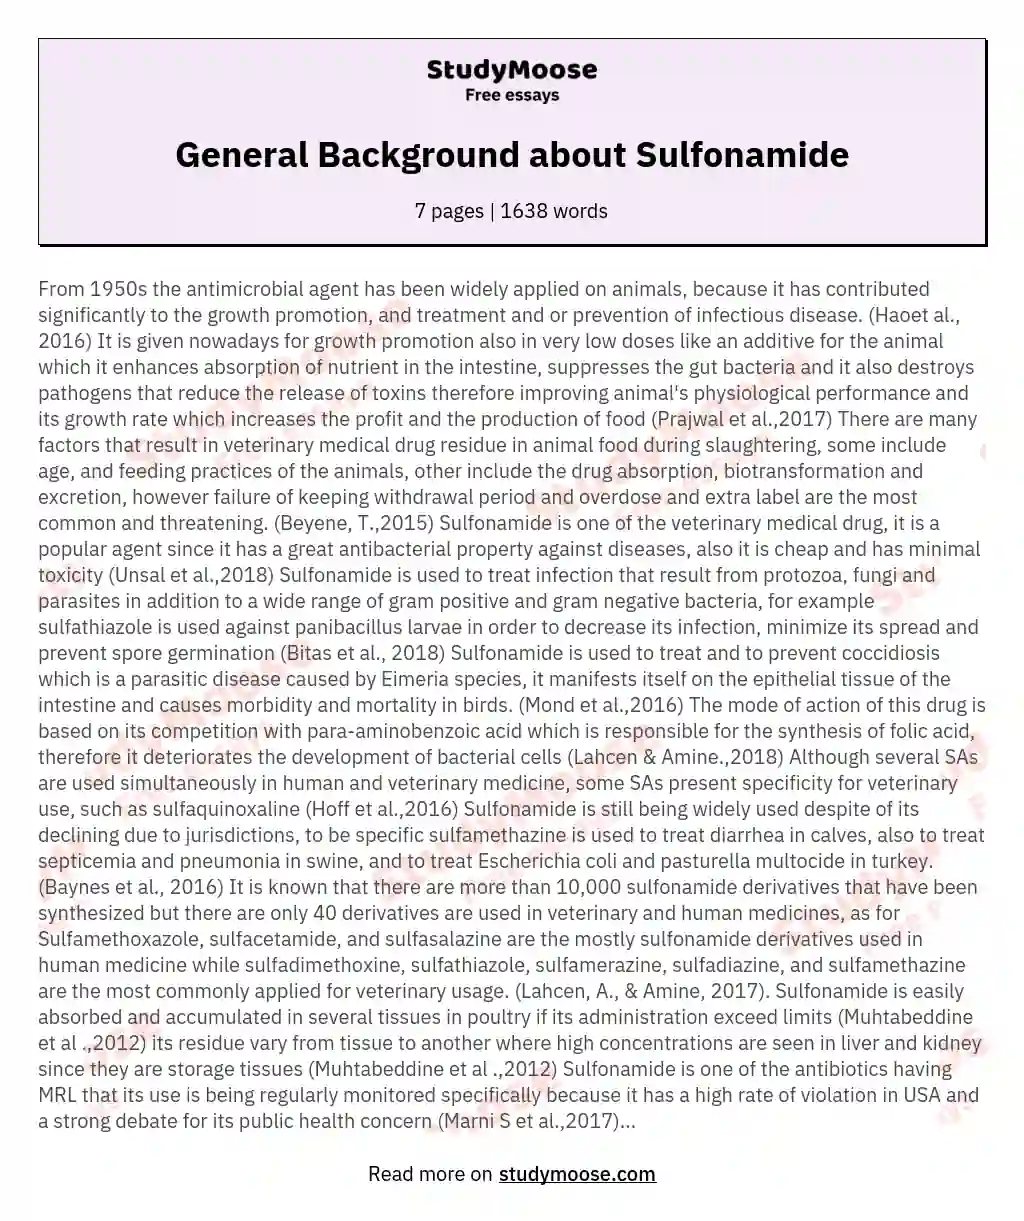 General Background about Sulfonamide essay